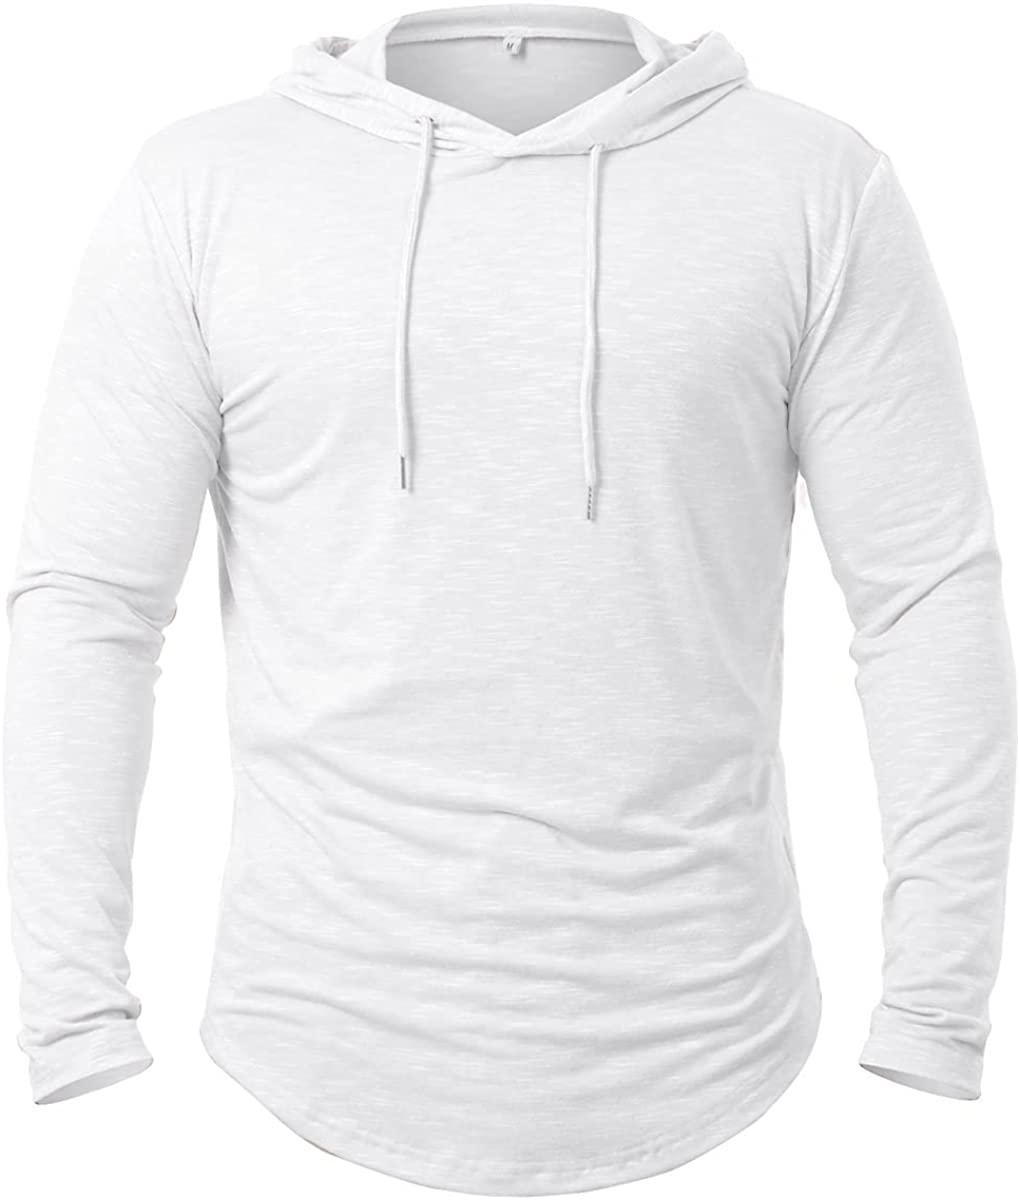 MANSDOUR Men's Athletic Hooded Shirts Long Sleeve Workout Sport